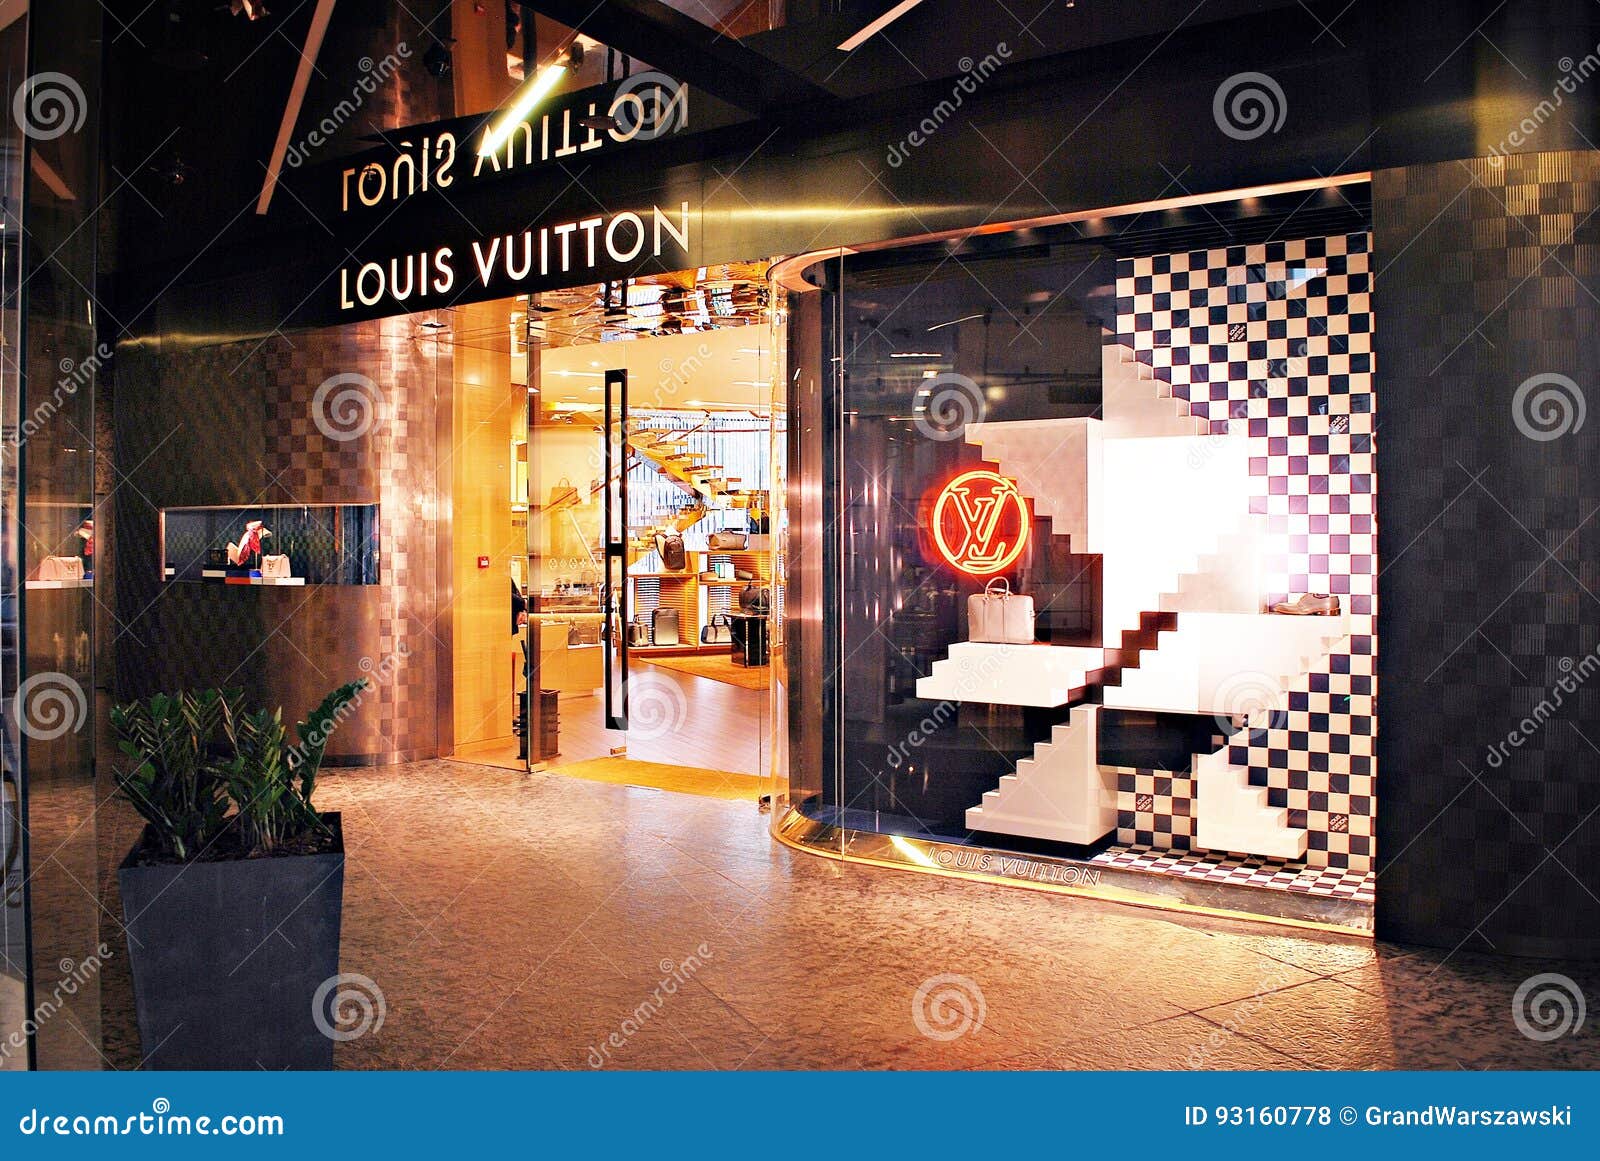 Louis Vuitton shop editorial stock photo. Image of accessories - 93160778